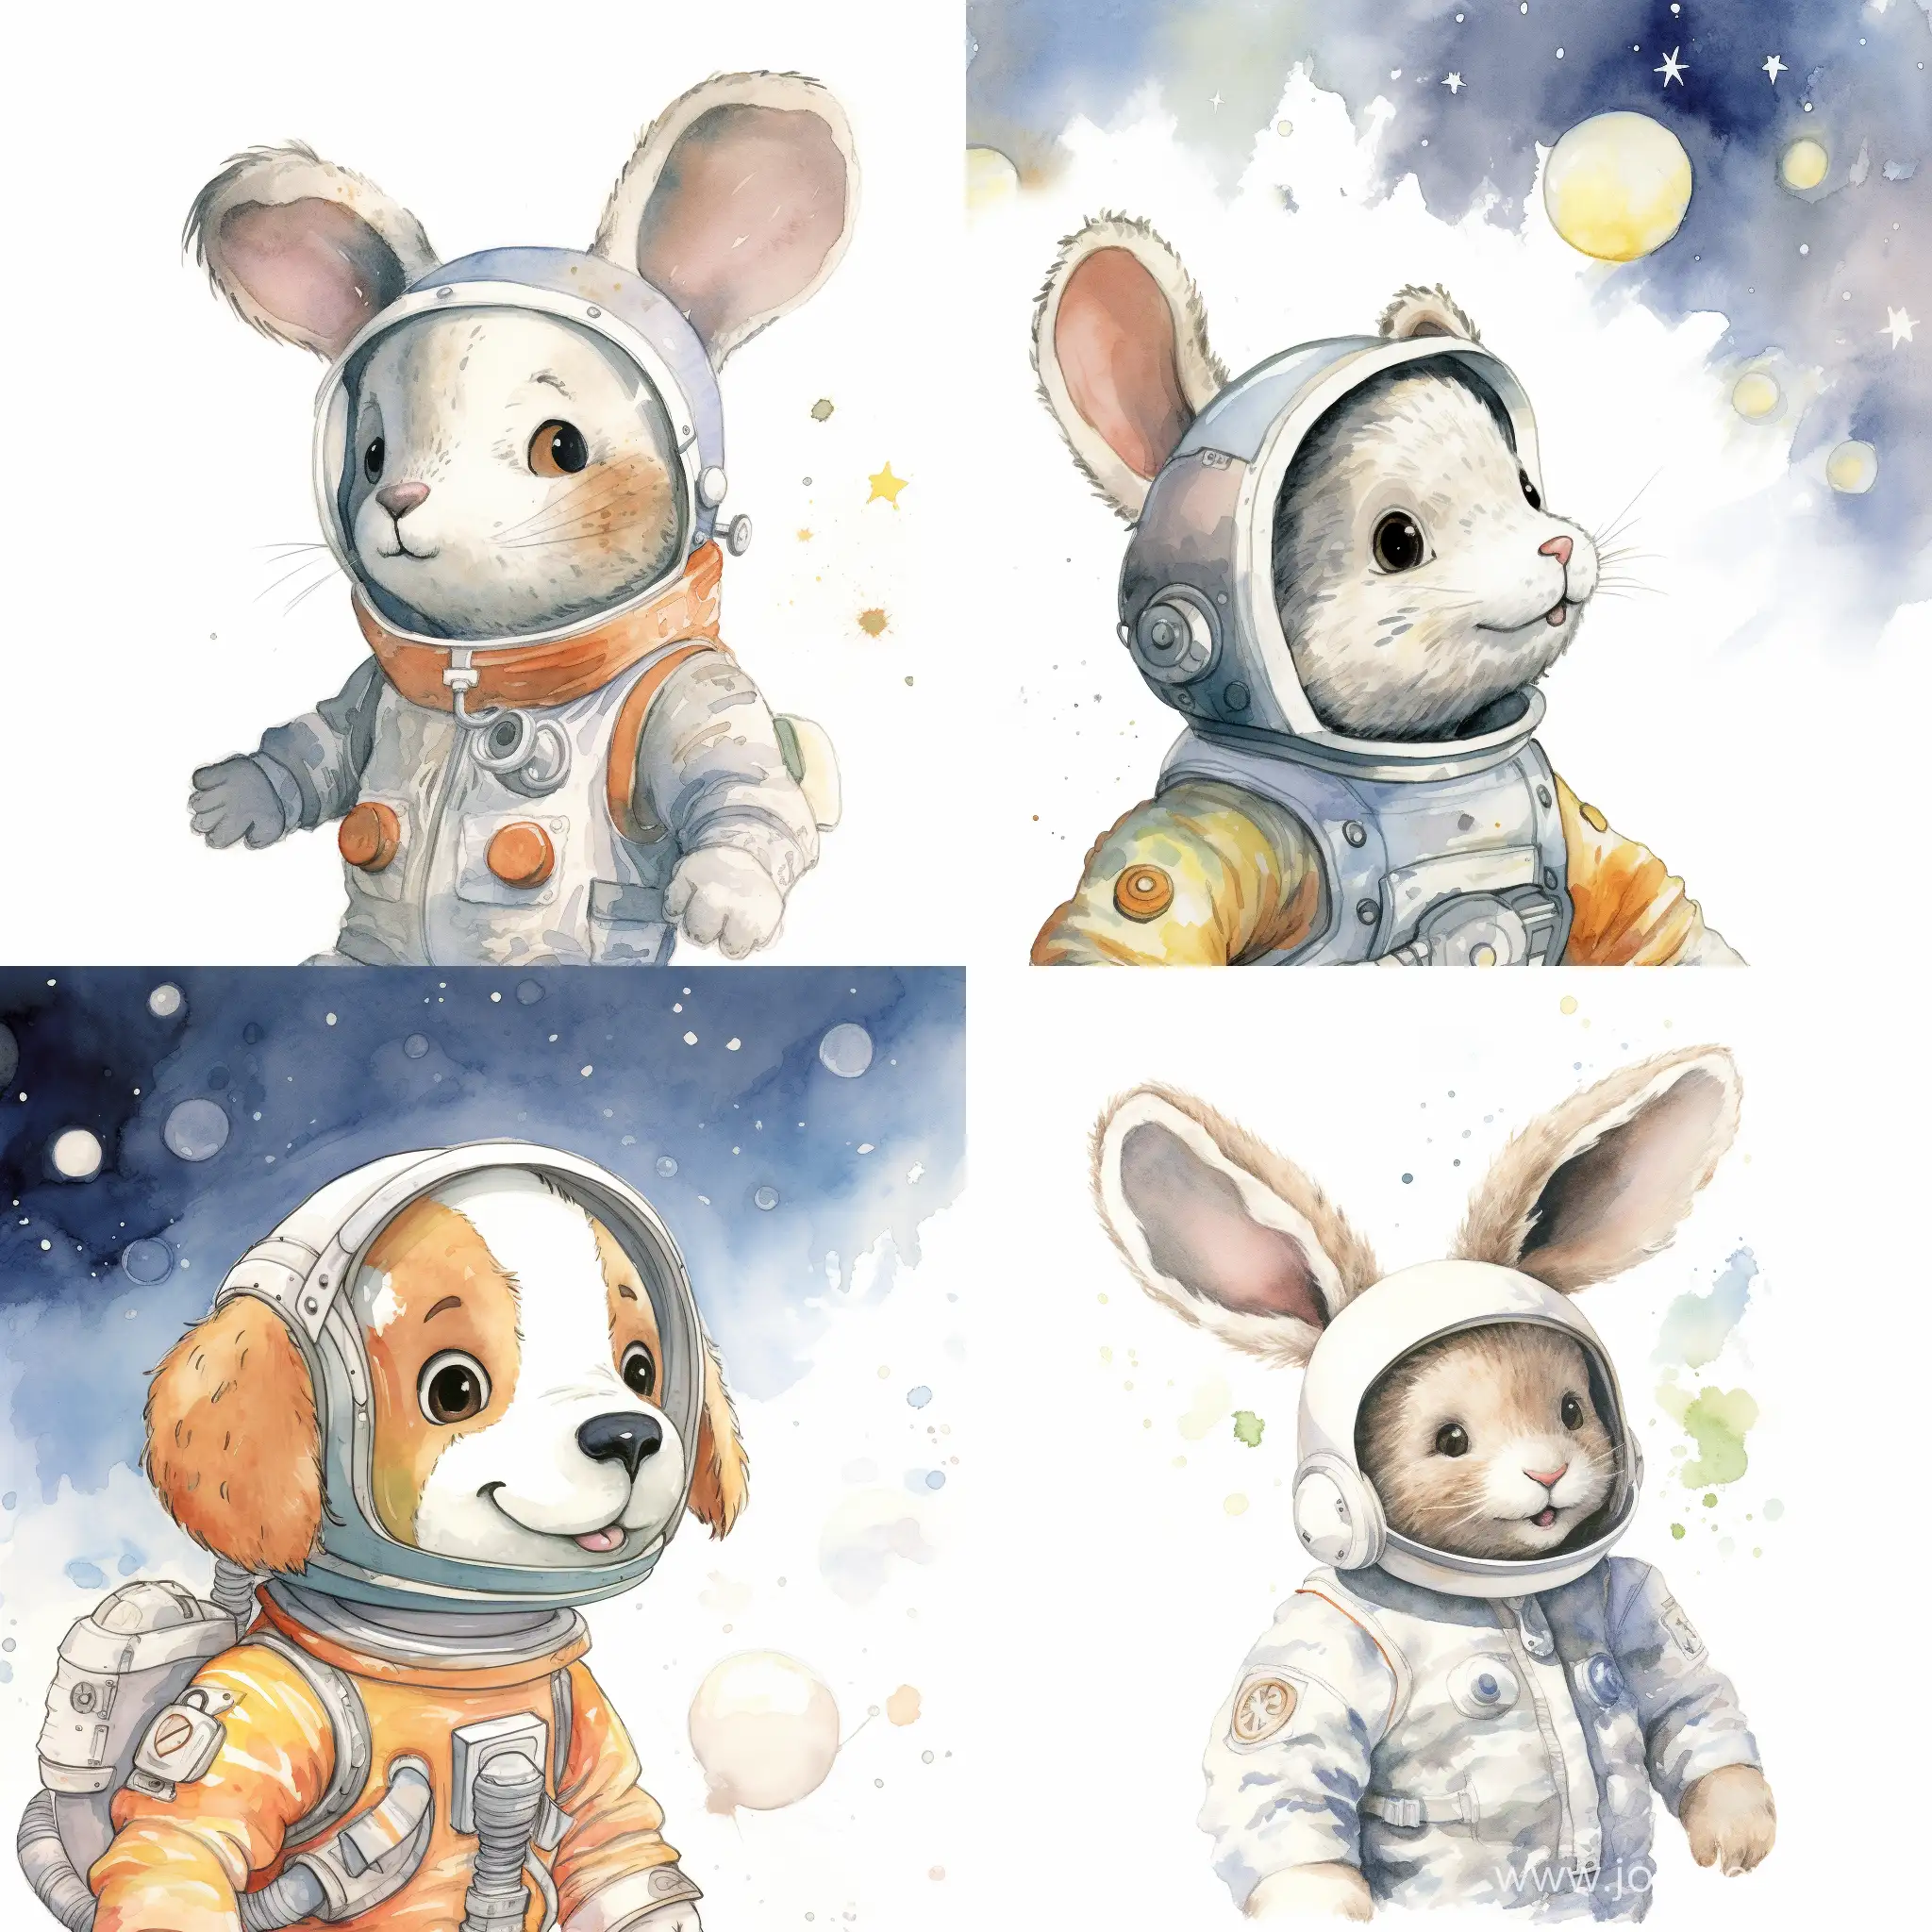 milo the mouse is looking up at the bright sky while wearing a replica space suit, children’s book illustration painted in a watercolour style, translucent washes of colour, soft texture and fluid blending, playful and whimsical, loose expressive brushwork, pastel colour palette,